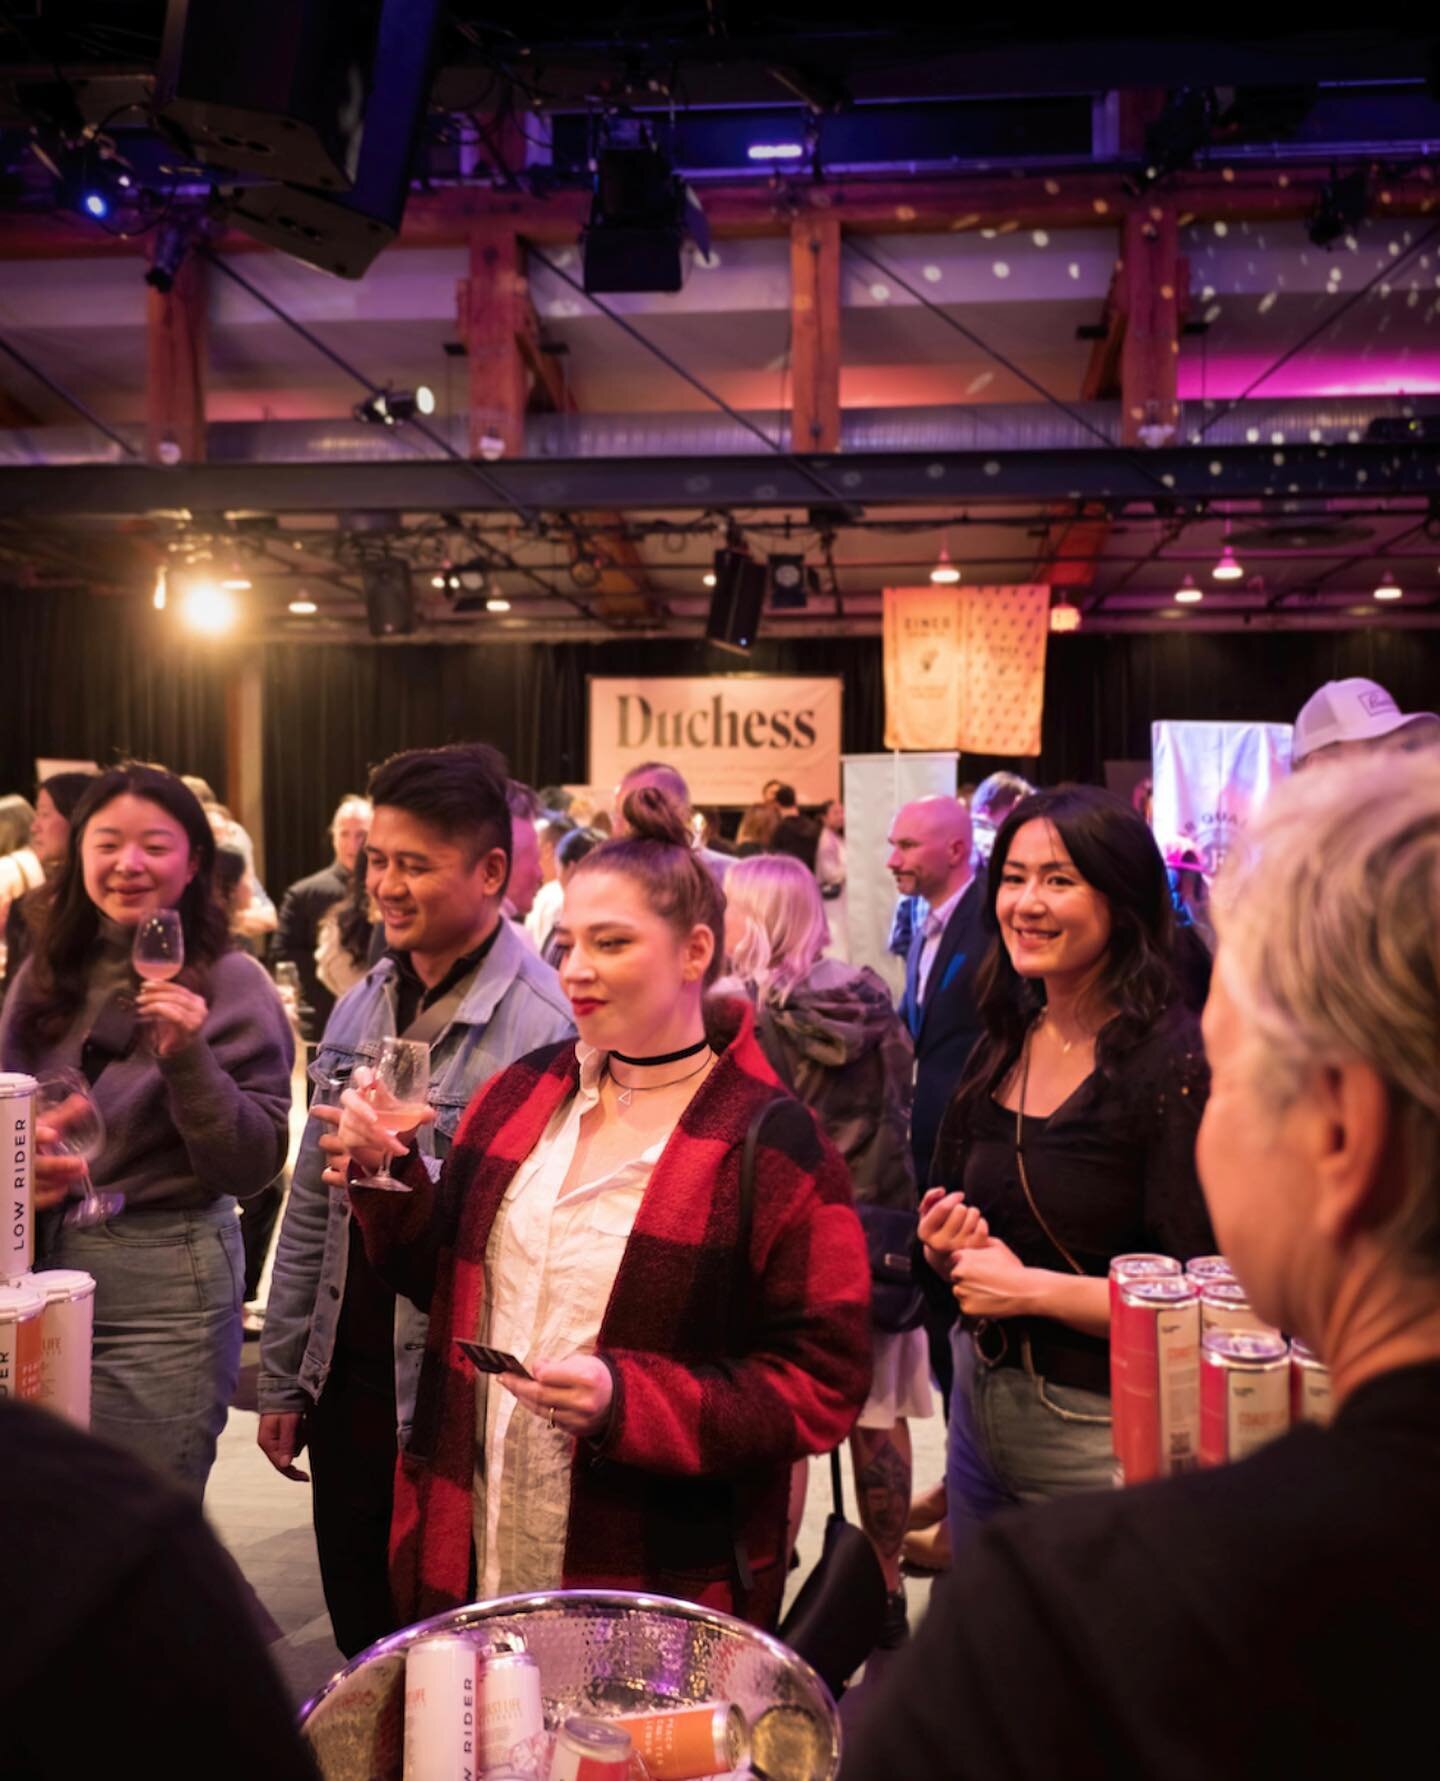 Since it's #FlashbackFriday... it's only appropriate to take a flash back in time to this moment last week when Vancouver's first RTD Cocktail Show debuted at @granville_island.

One room, 65+ uniquely crafted concoctions, and delicious bites by @van